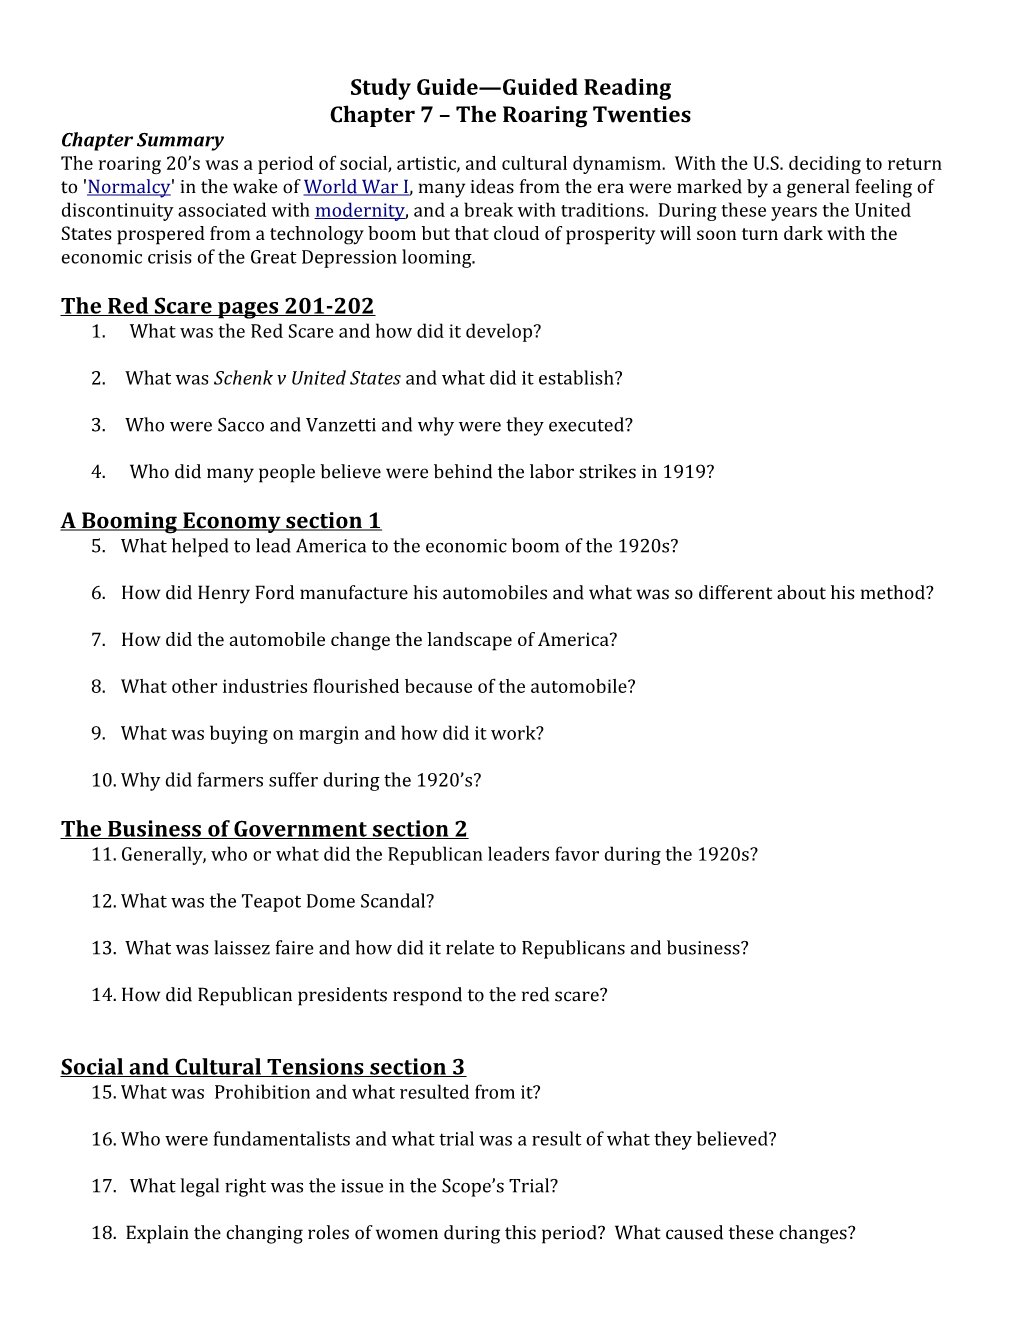 Study Guide Guided Reading